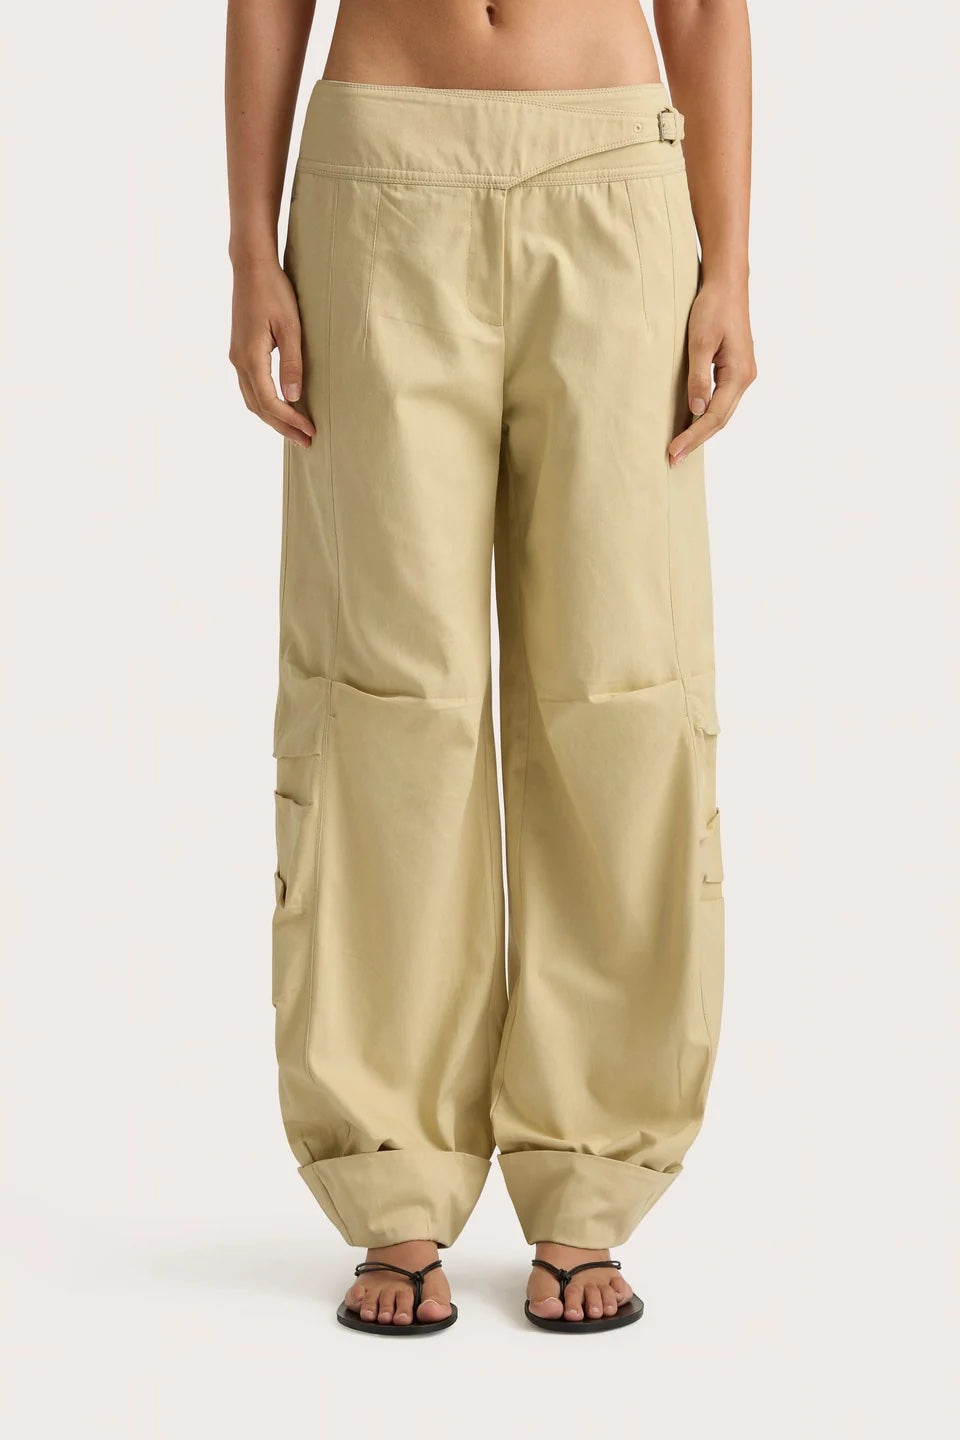 FAITHFULL THE BRAND Calais Pant in Pear available at The New Trend